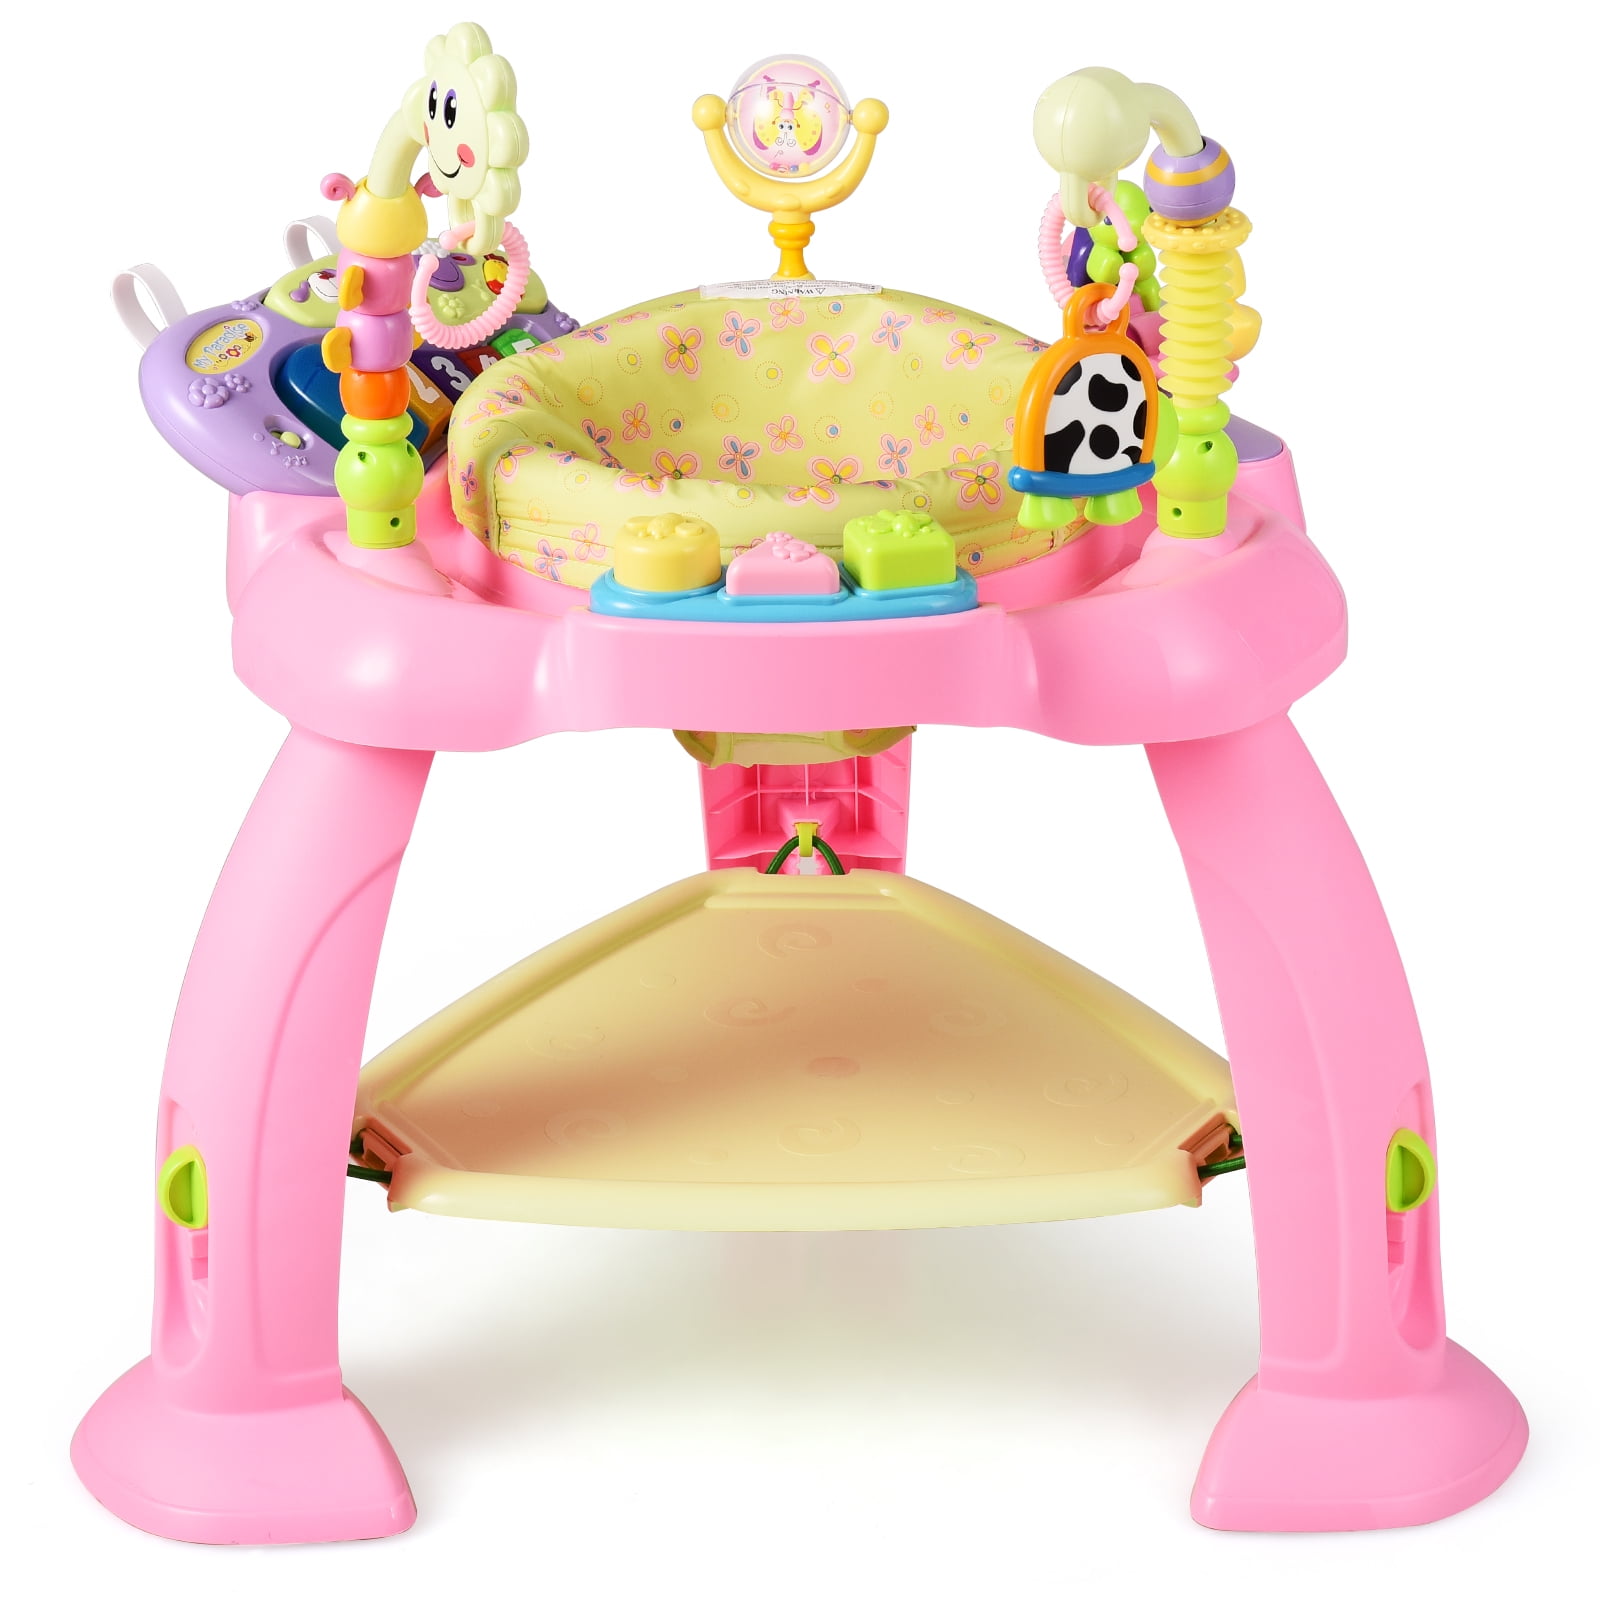 Topbuy 3-in-1 Baby Jump Rocking Chair Kids Fun Activity Center Work bench with 360°Seat Pink